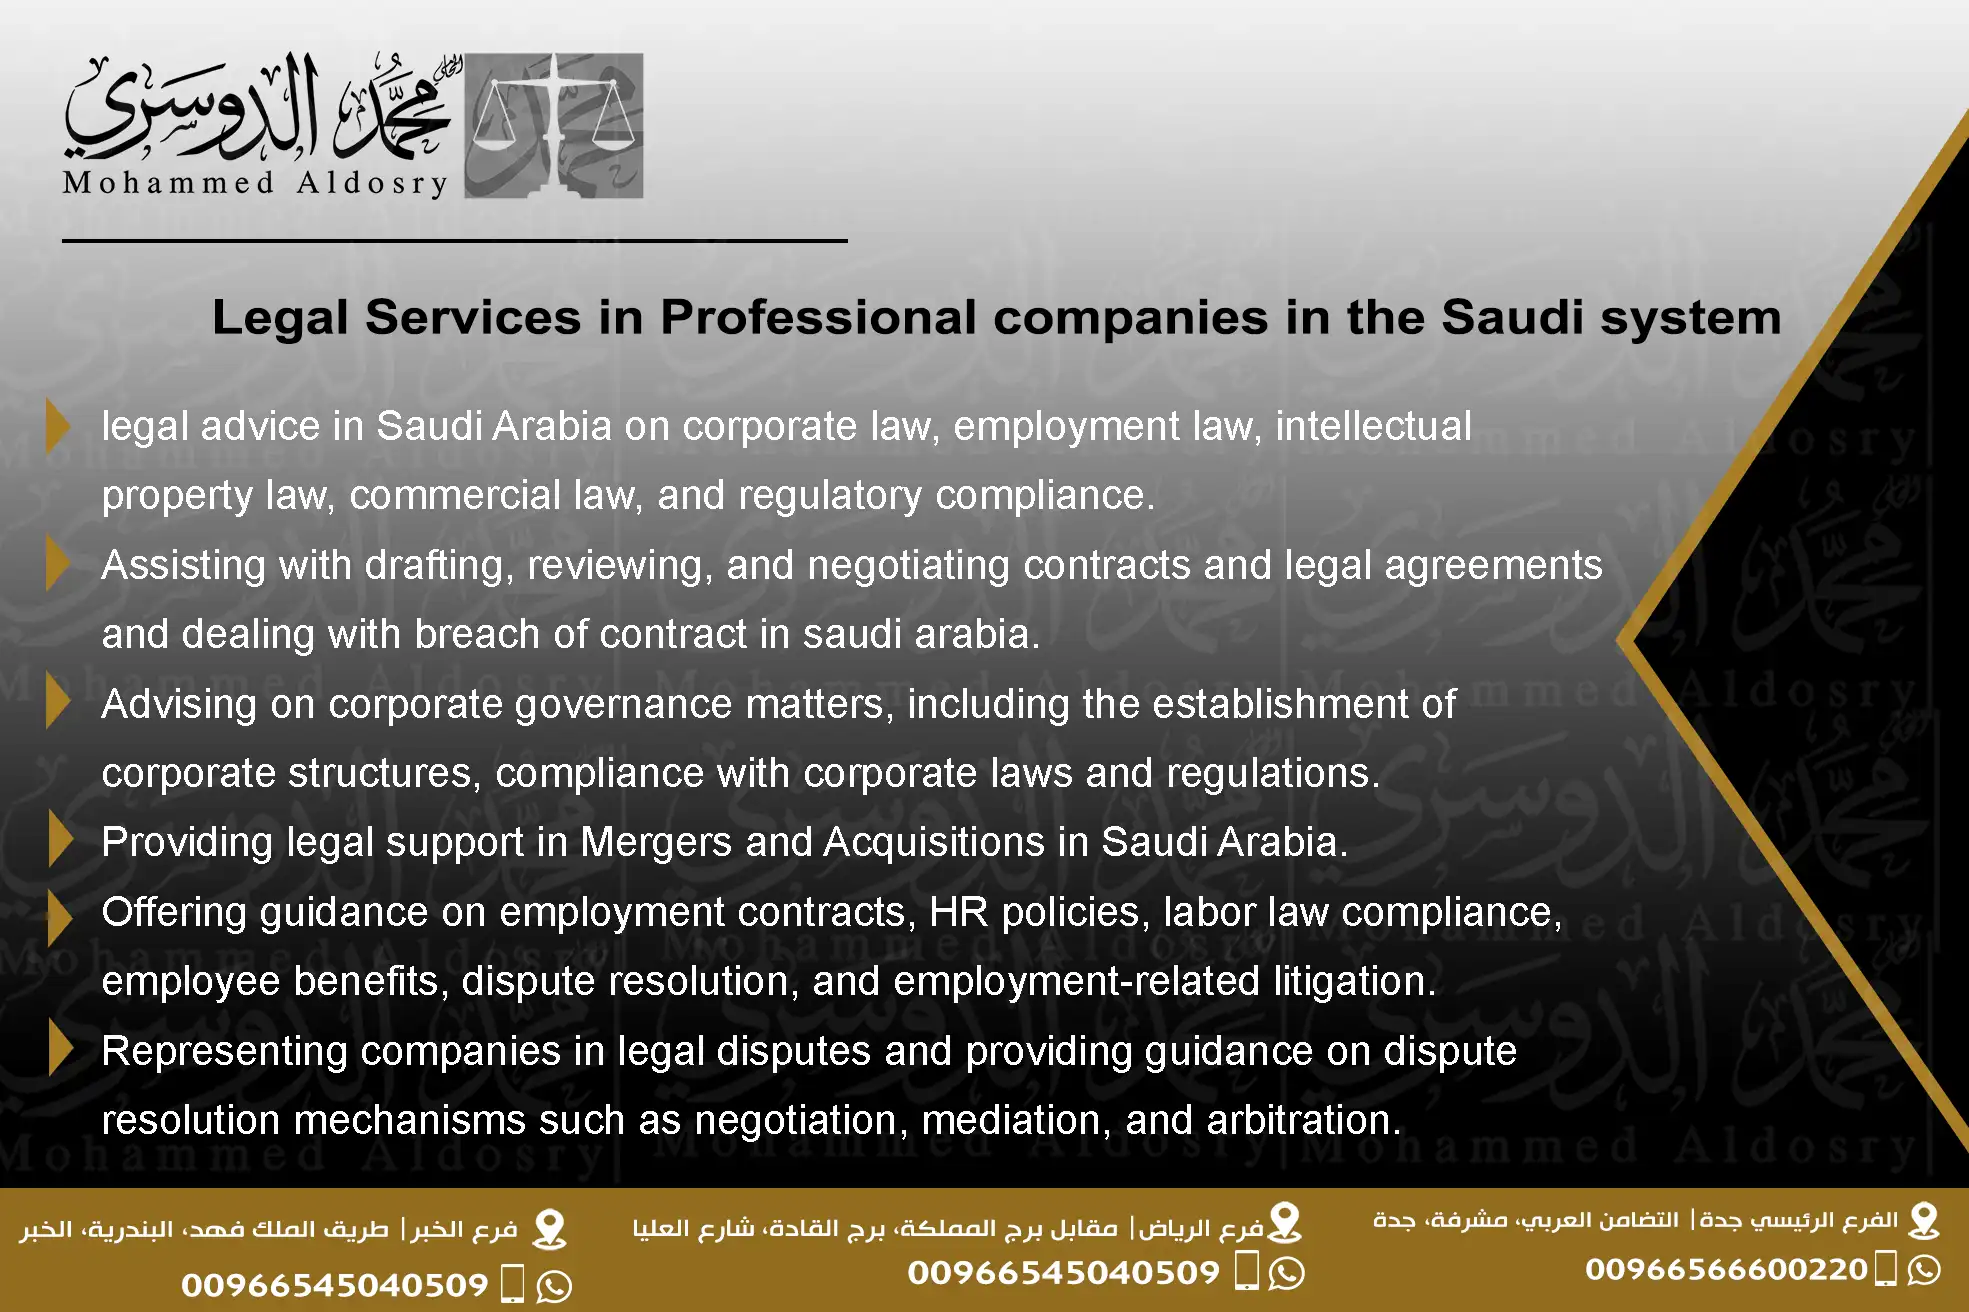 Legal Services in Professional companies in the Saudi system